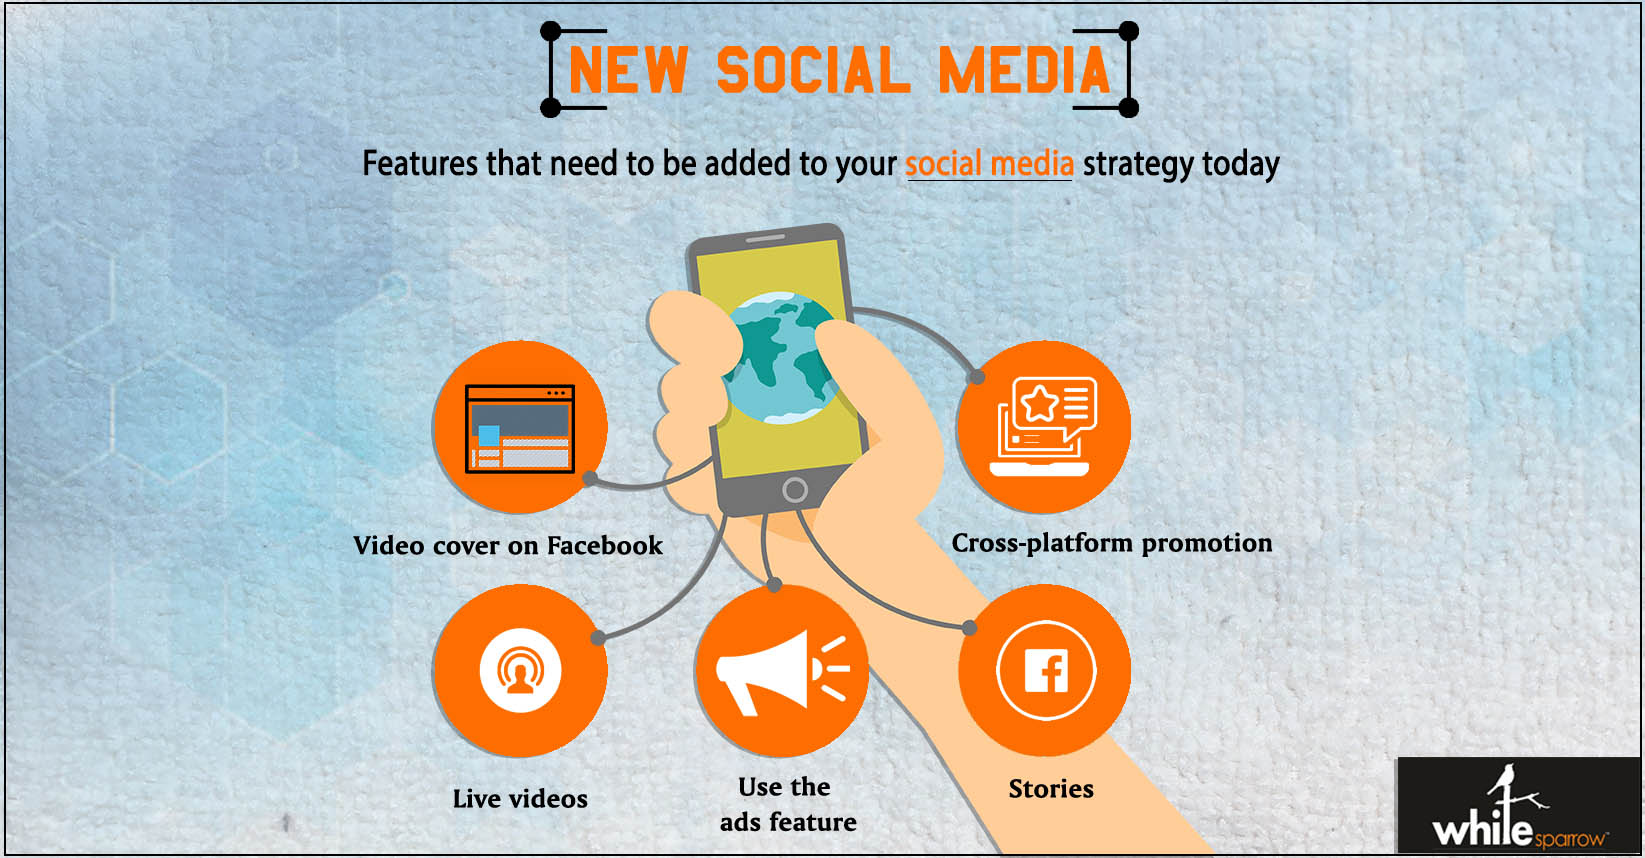 5 new social media features that need to be added to your social media strategy today